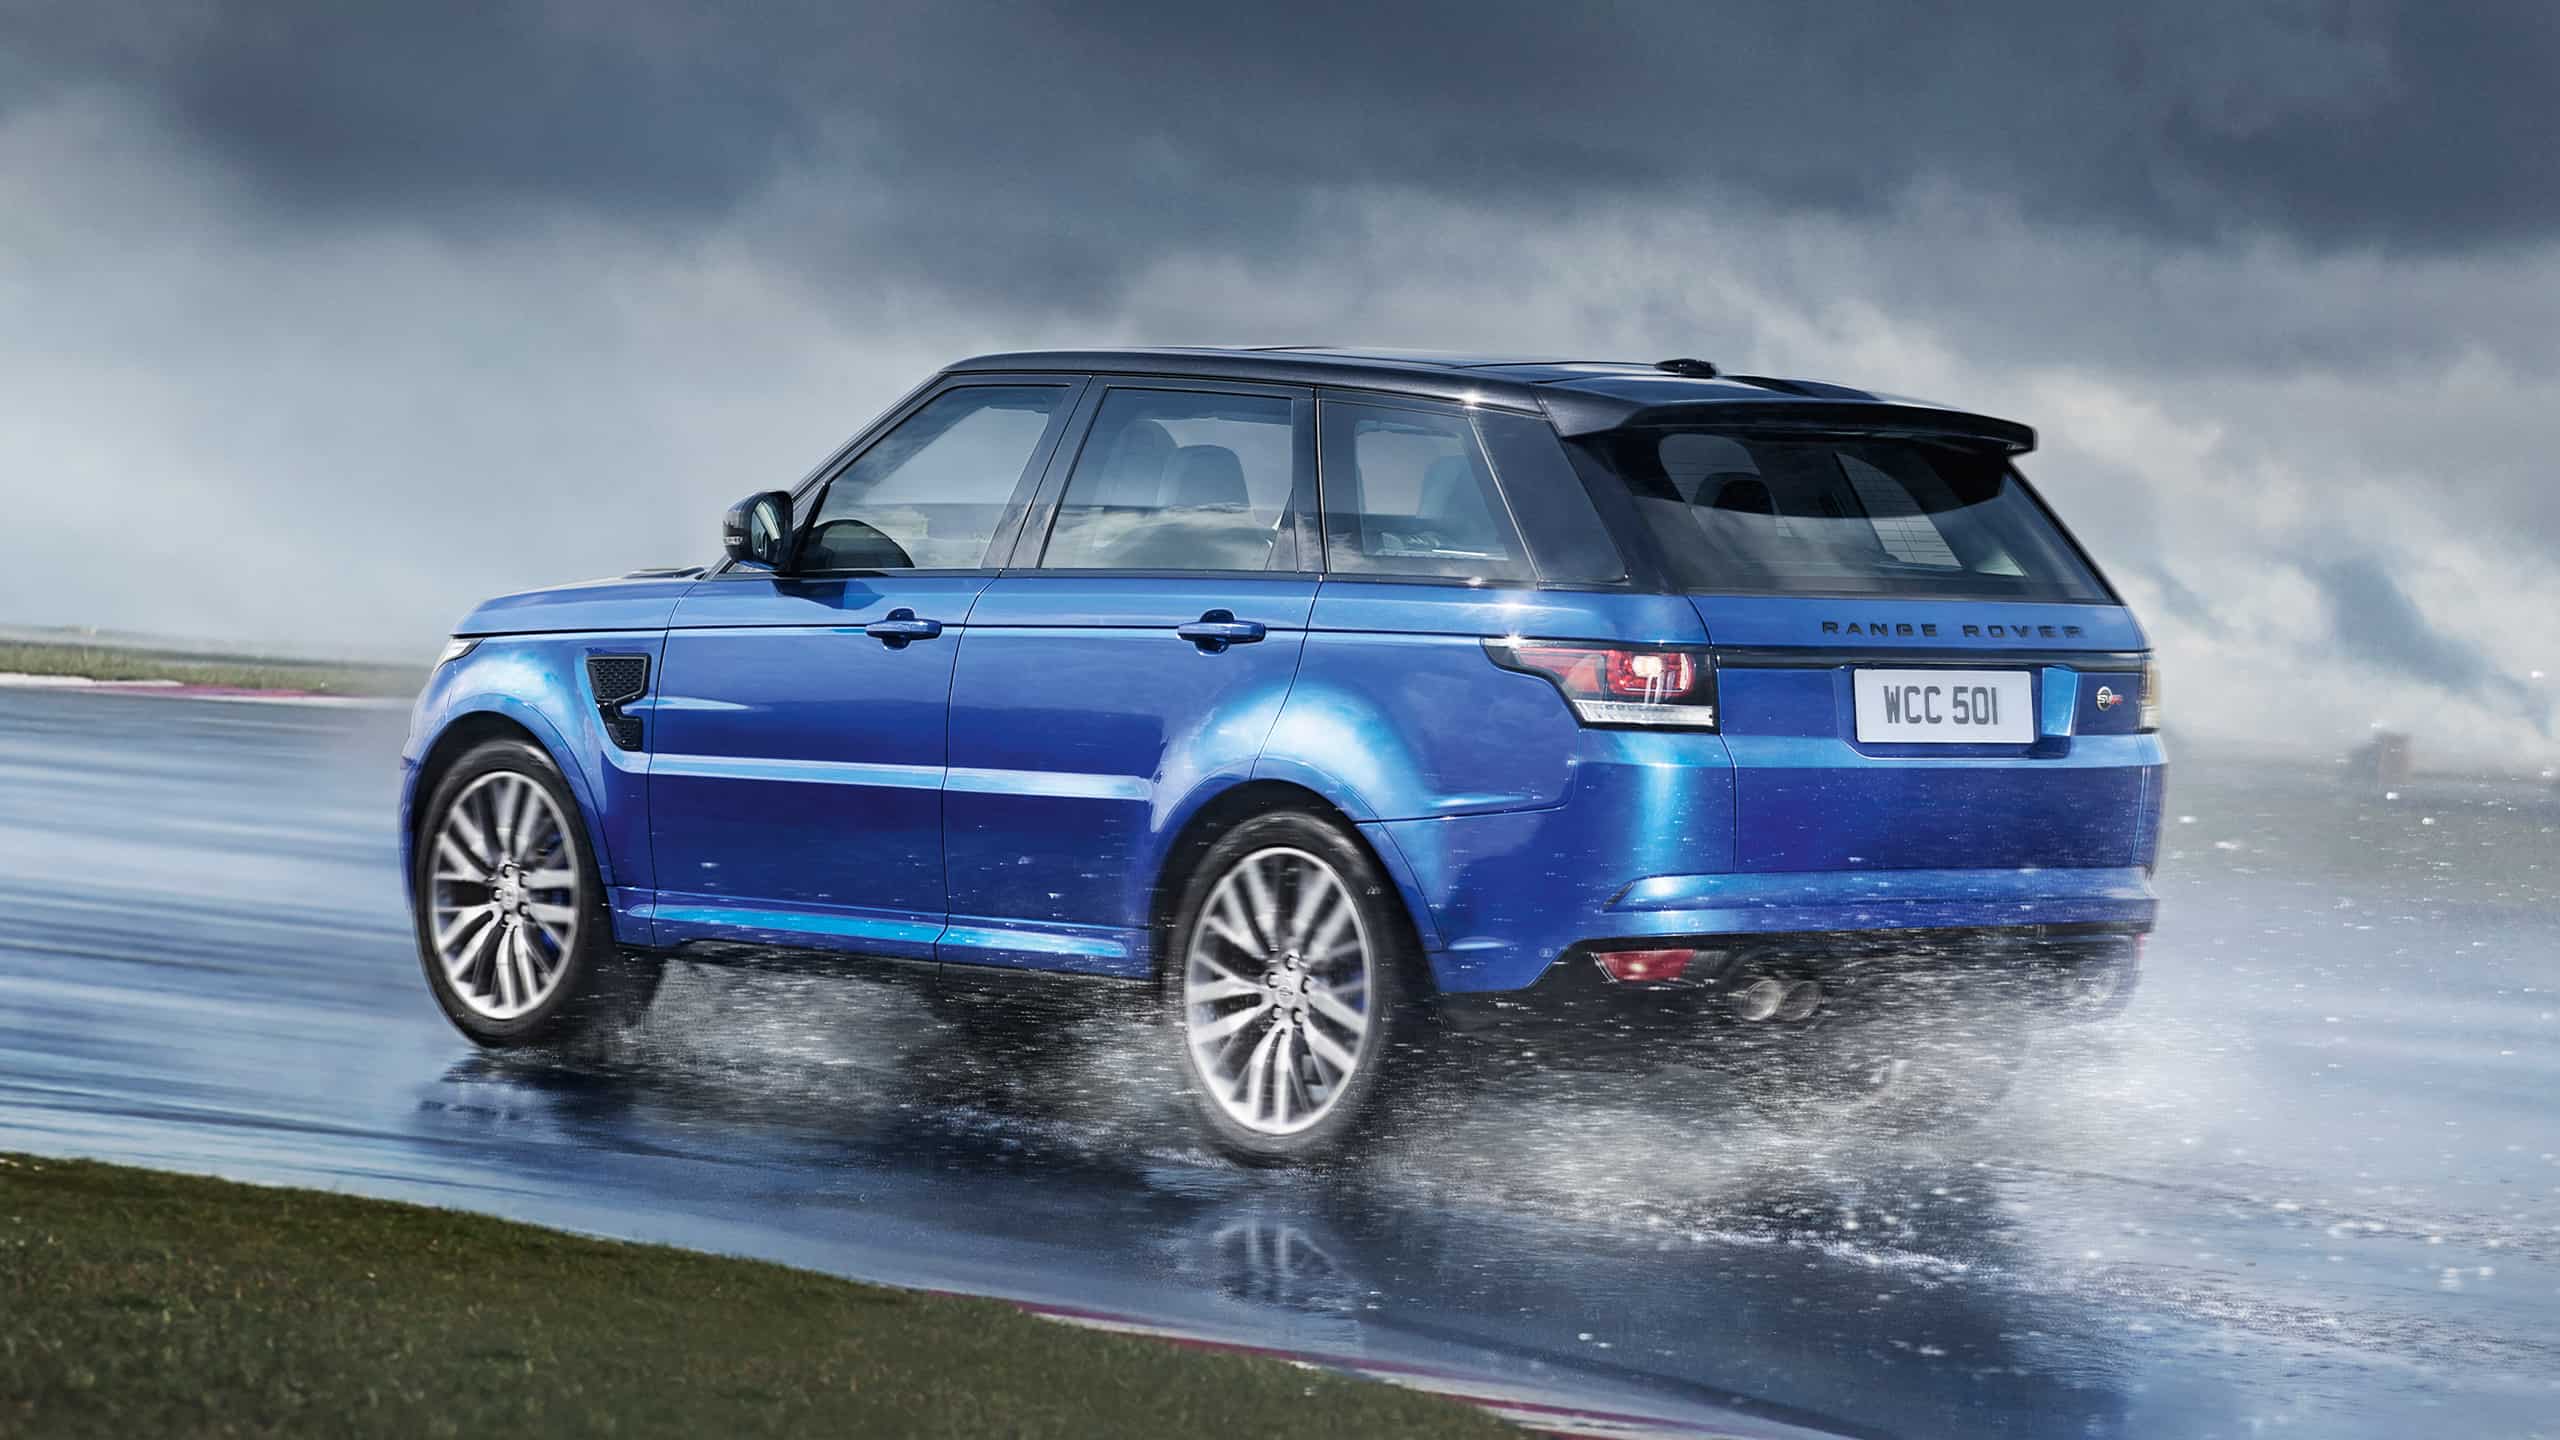 Range Rover Sport driving quickly through water on road